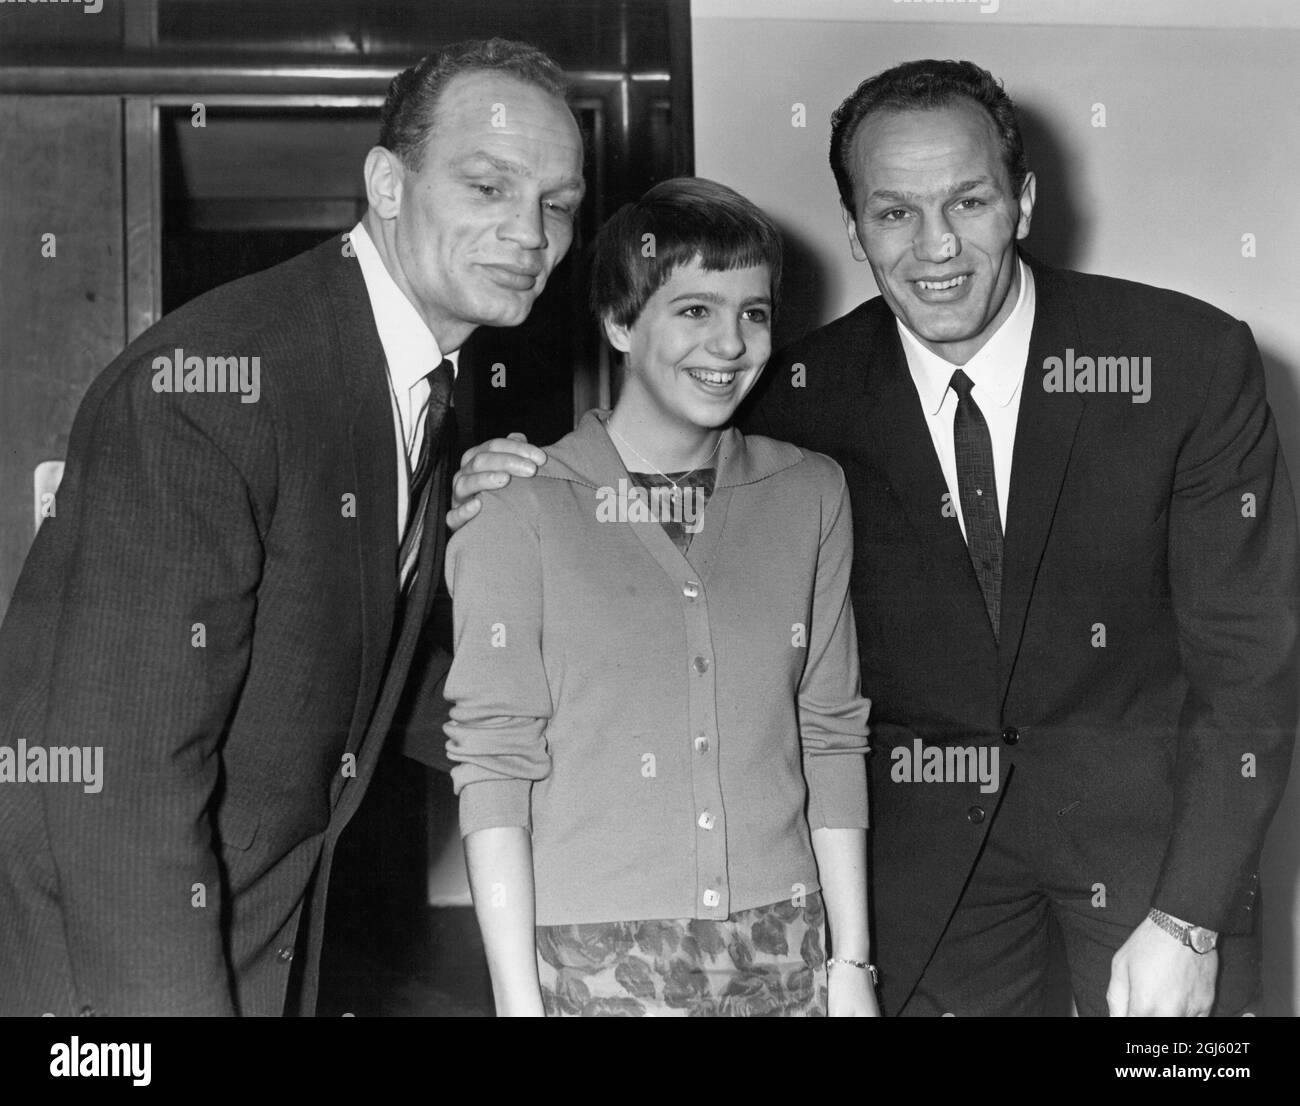 Linda Ludgrove , winner of two gold swimming medals at the Empire Games in Australia , with the Cooper twins , Jim ( left ) and Henry Cooper , the British Heavyweight Champion . 8 January 1963 Stock Photo